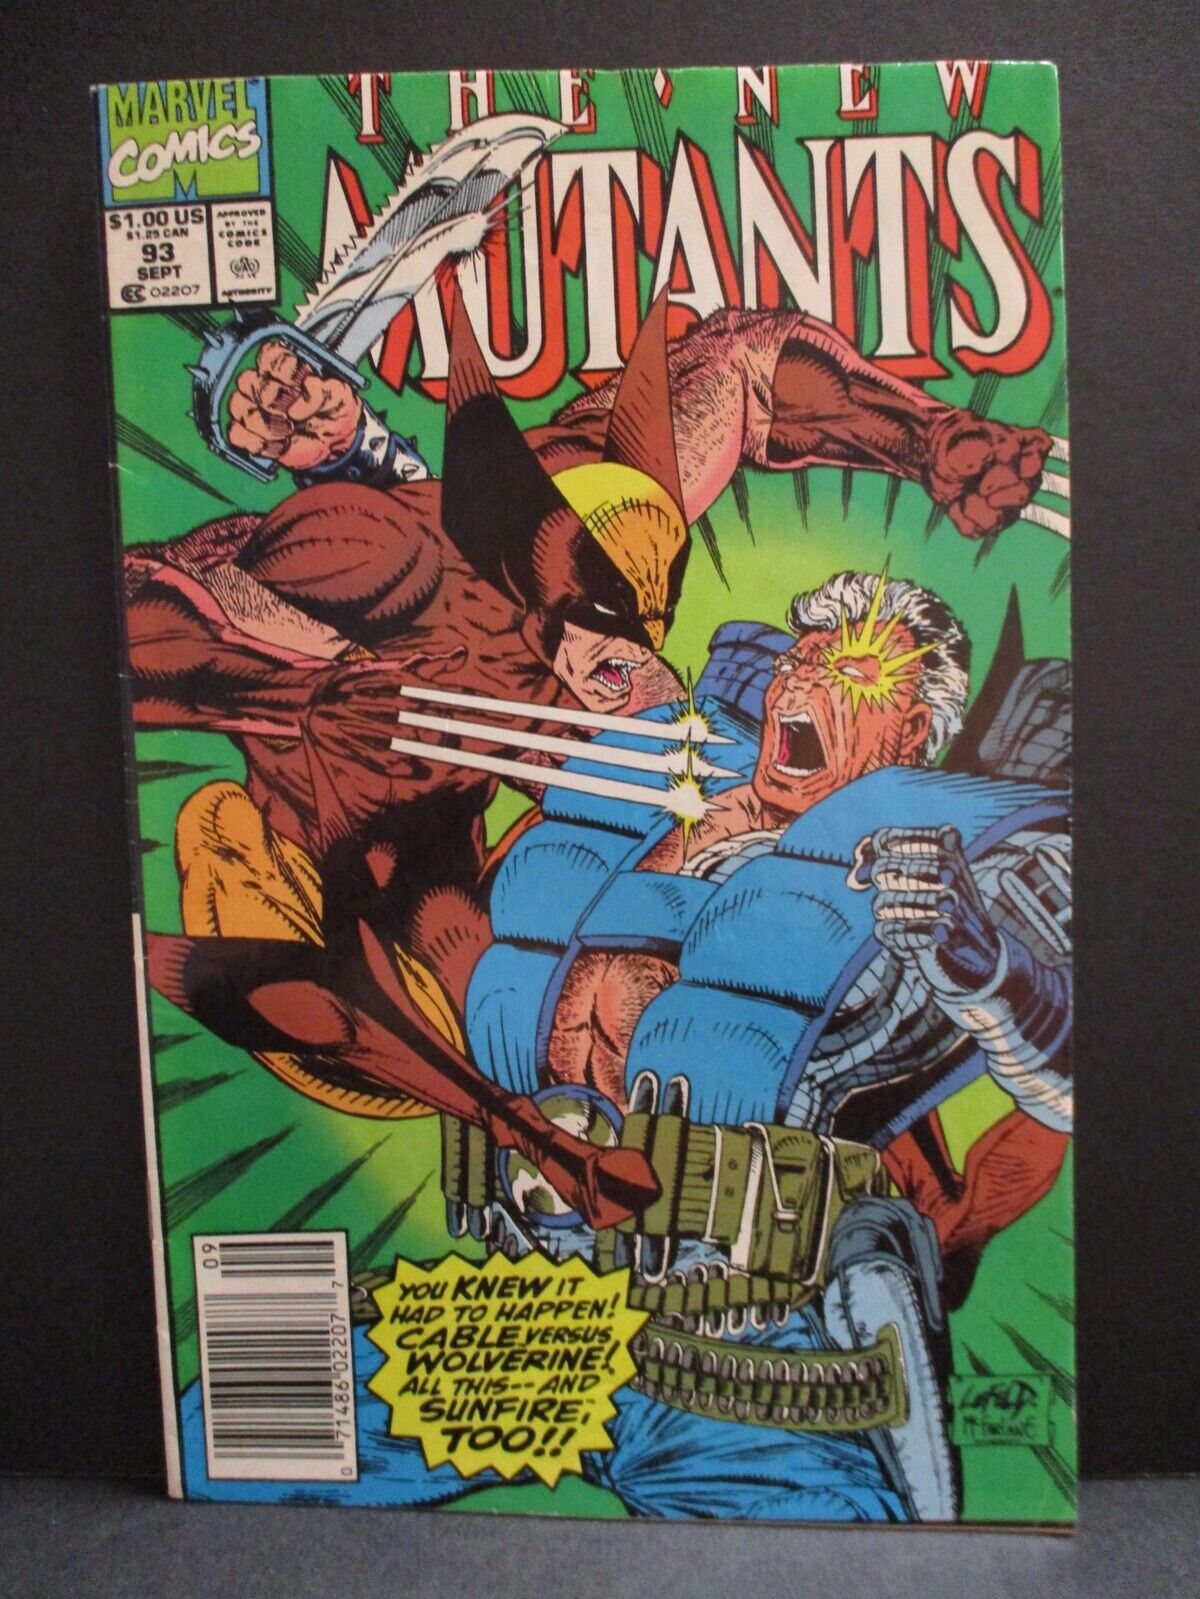 The New Mutants Issue 93 Cable vs Wolverine Marvel Comics Excellent Condition